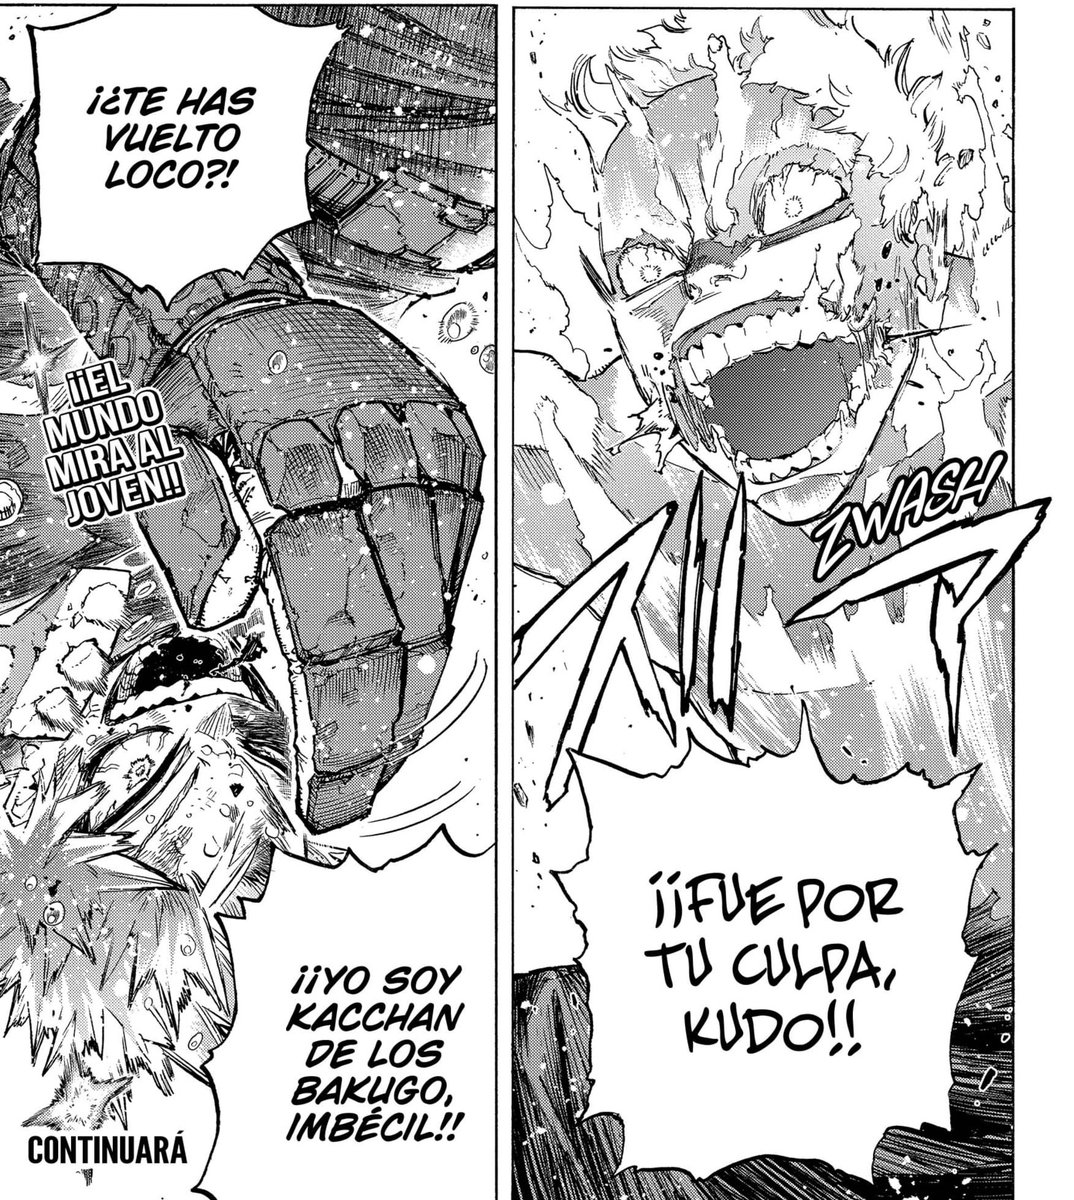 OH MY FUCKING GOD, WE GOT A NAME FOR SECOND AND BAKUGO CALLING HIMSELF KACCHAN?!?!? ALL IN THE SAME PAGE?!? 